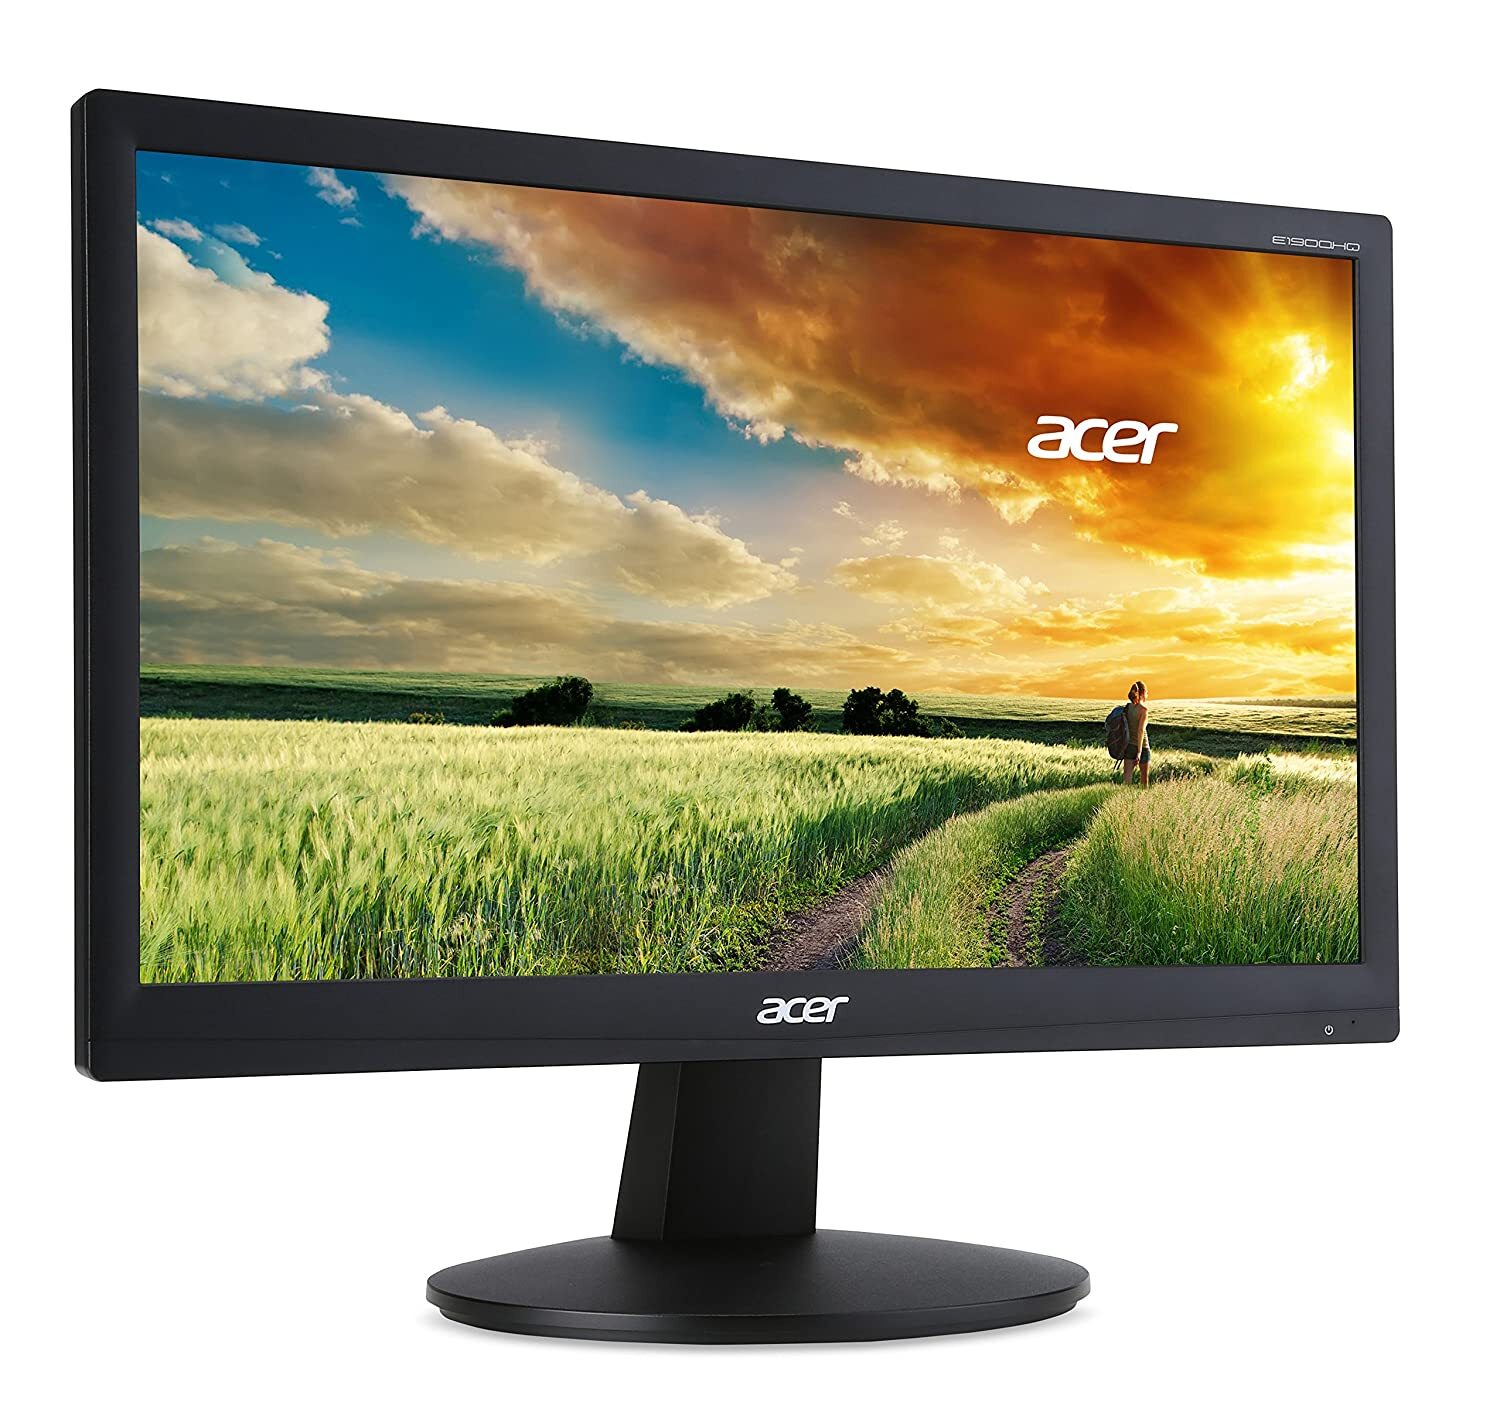 Acer E1900HQ 18.5-inch LCD Monitor